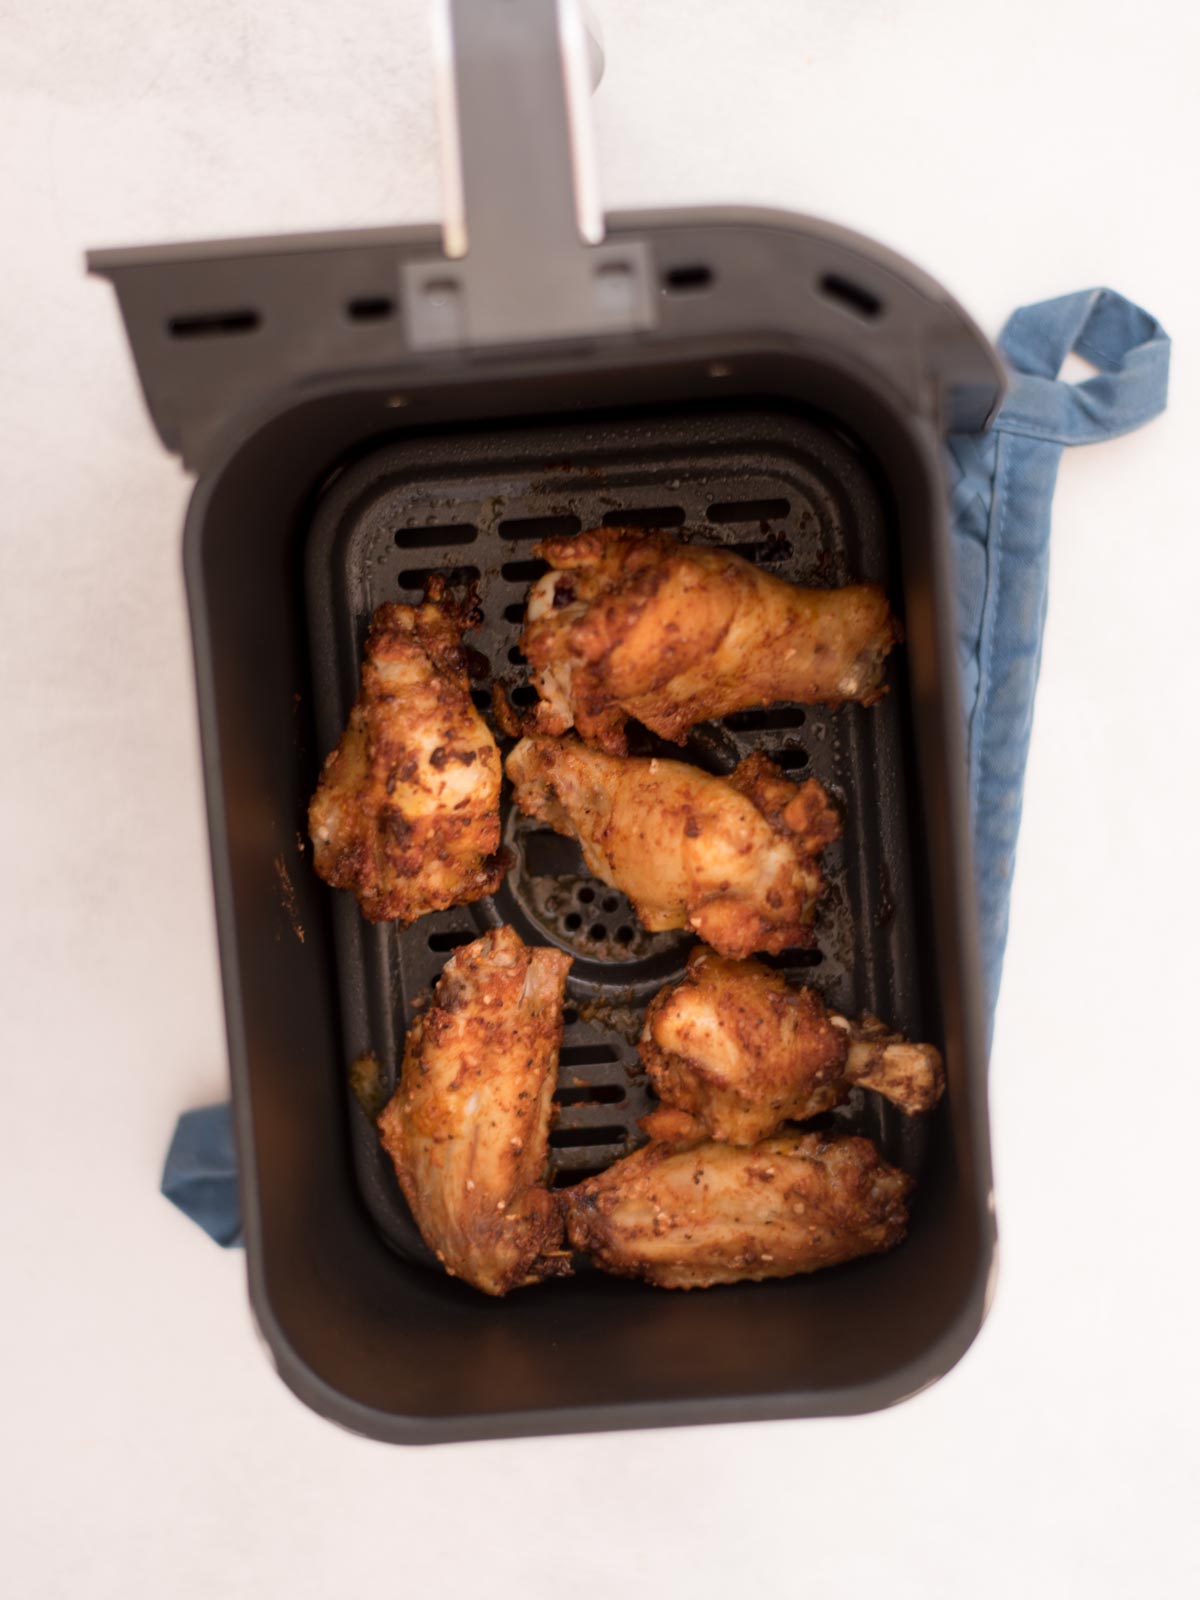 seasoned wings partially cooked inside of an air fryer basket